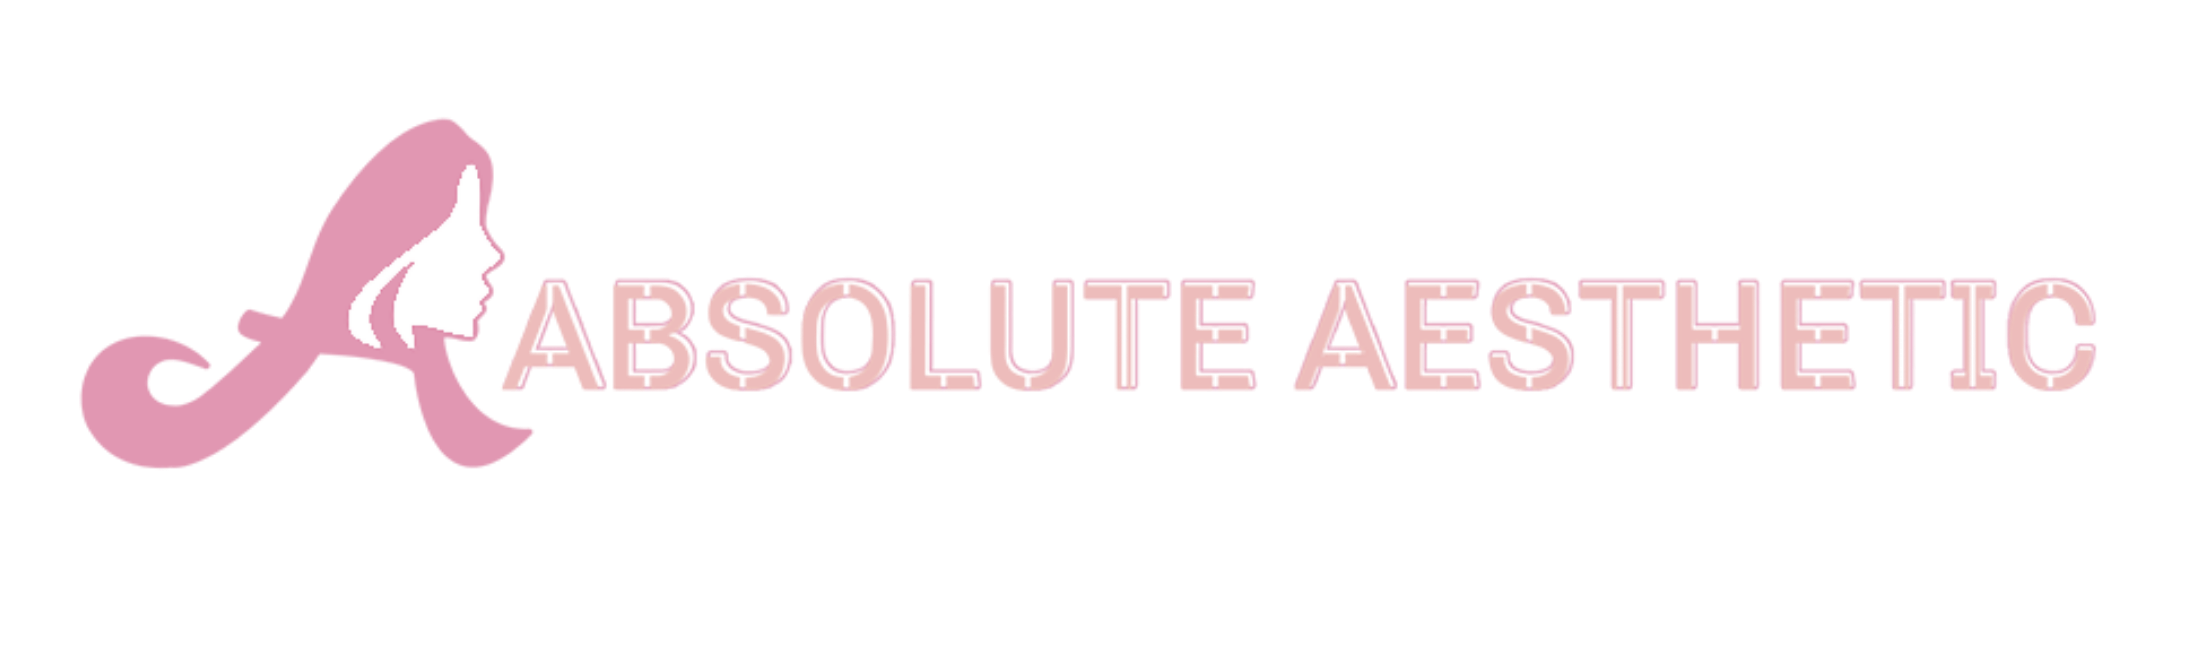 ABSOLUTE AESTHETIC COMPANY LIMITED